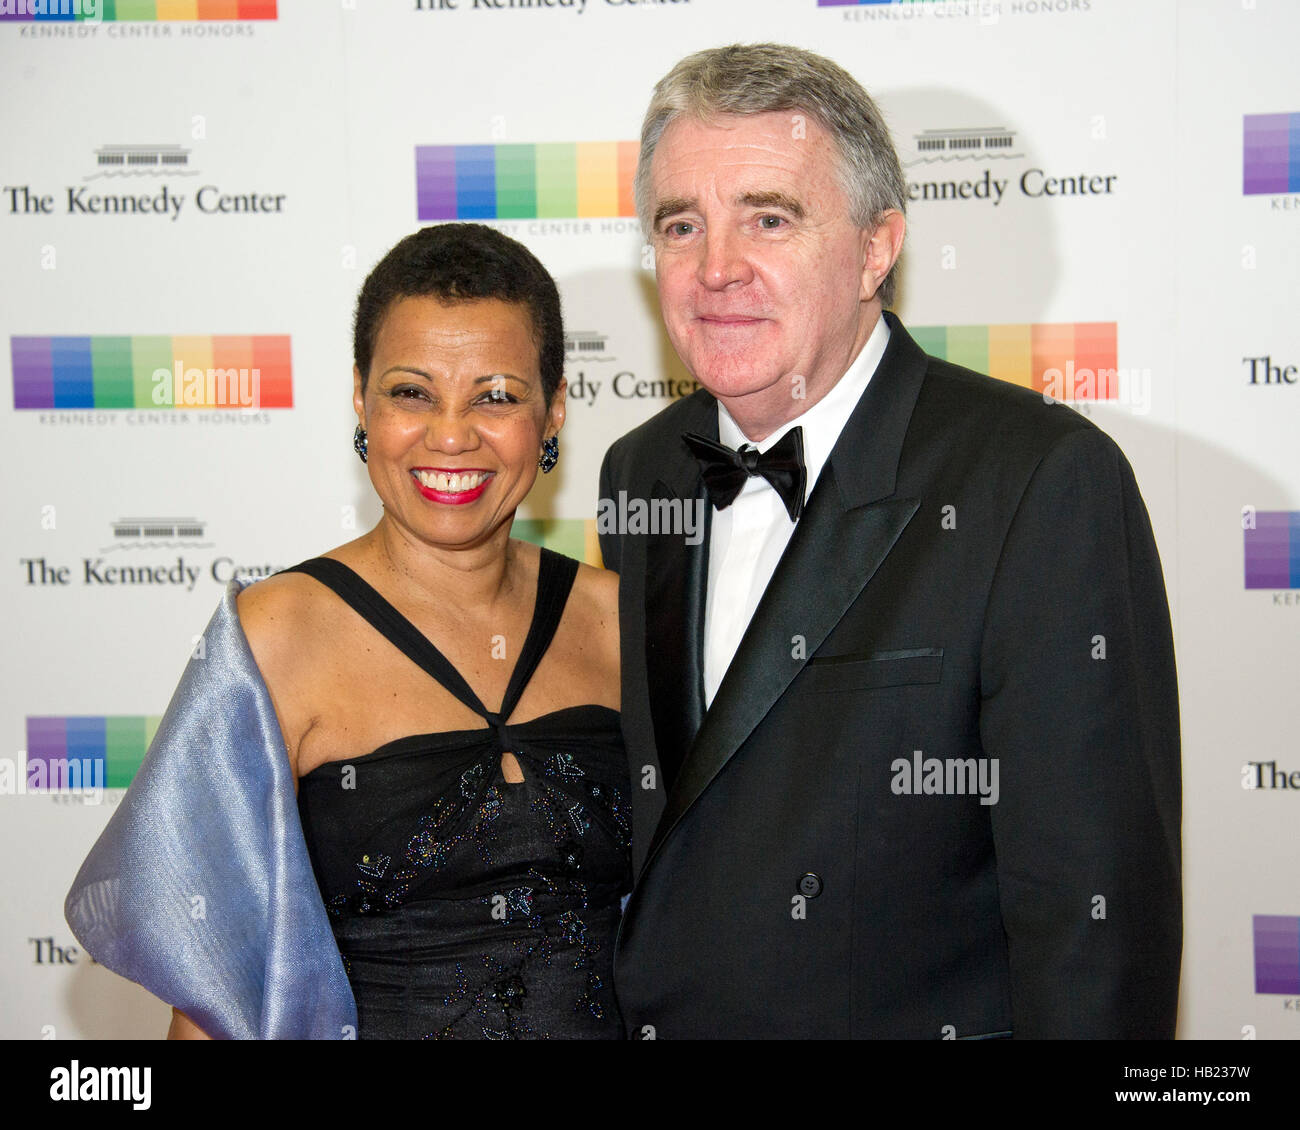 Opera singer Harolyn Blackwell and Peter Greer arrive for the formal Artist's Dinner honoring the recipients of the 39th Annual Kennedy Center Honors hosted by United States Secretary of State John F. Kerry at the U.S. Department of State in Washington, DC on Saturday, December 3, 2016. The 2016 honorees are: Argentine pianist Martha Argerich; rock band the Eagles; screen and stage actor Al Pacino; gospel and blues singer Mavis Staples; and musician James Taylor. Credit: Ron Sachs/Pool via CNP - NO WIRE SERVICE - Photo: Ron Sachs/Consolidated/dpa Stock Photo